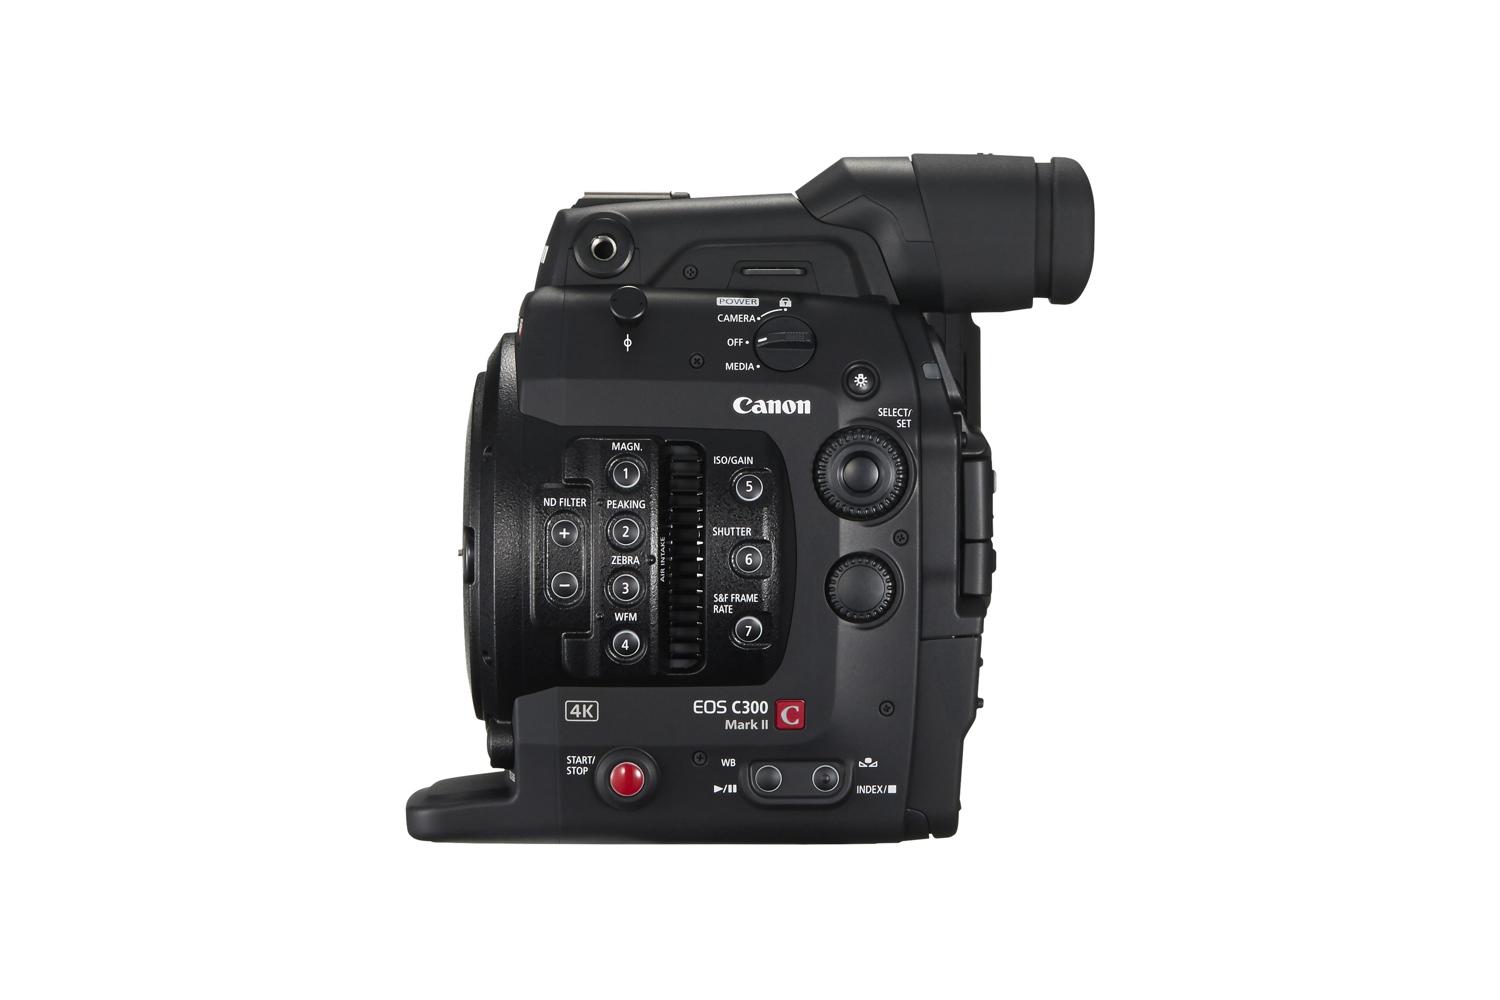 canons new affordable 4k camcorder ideal for budding filmmakers youtube creators canon c300mkii 4